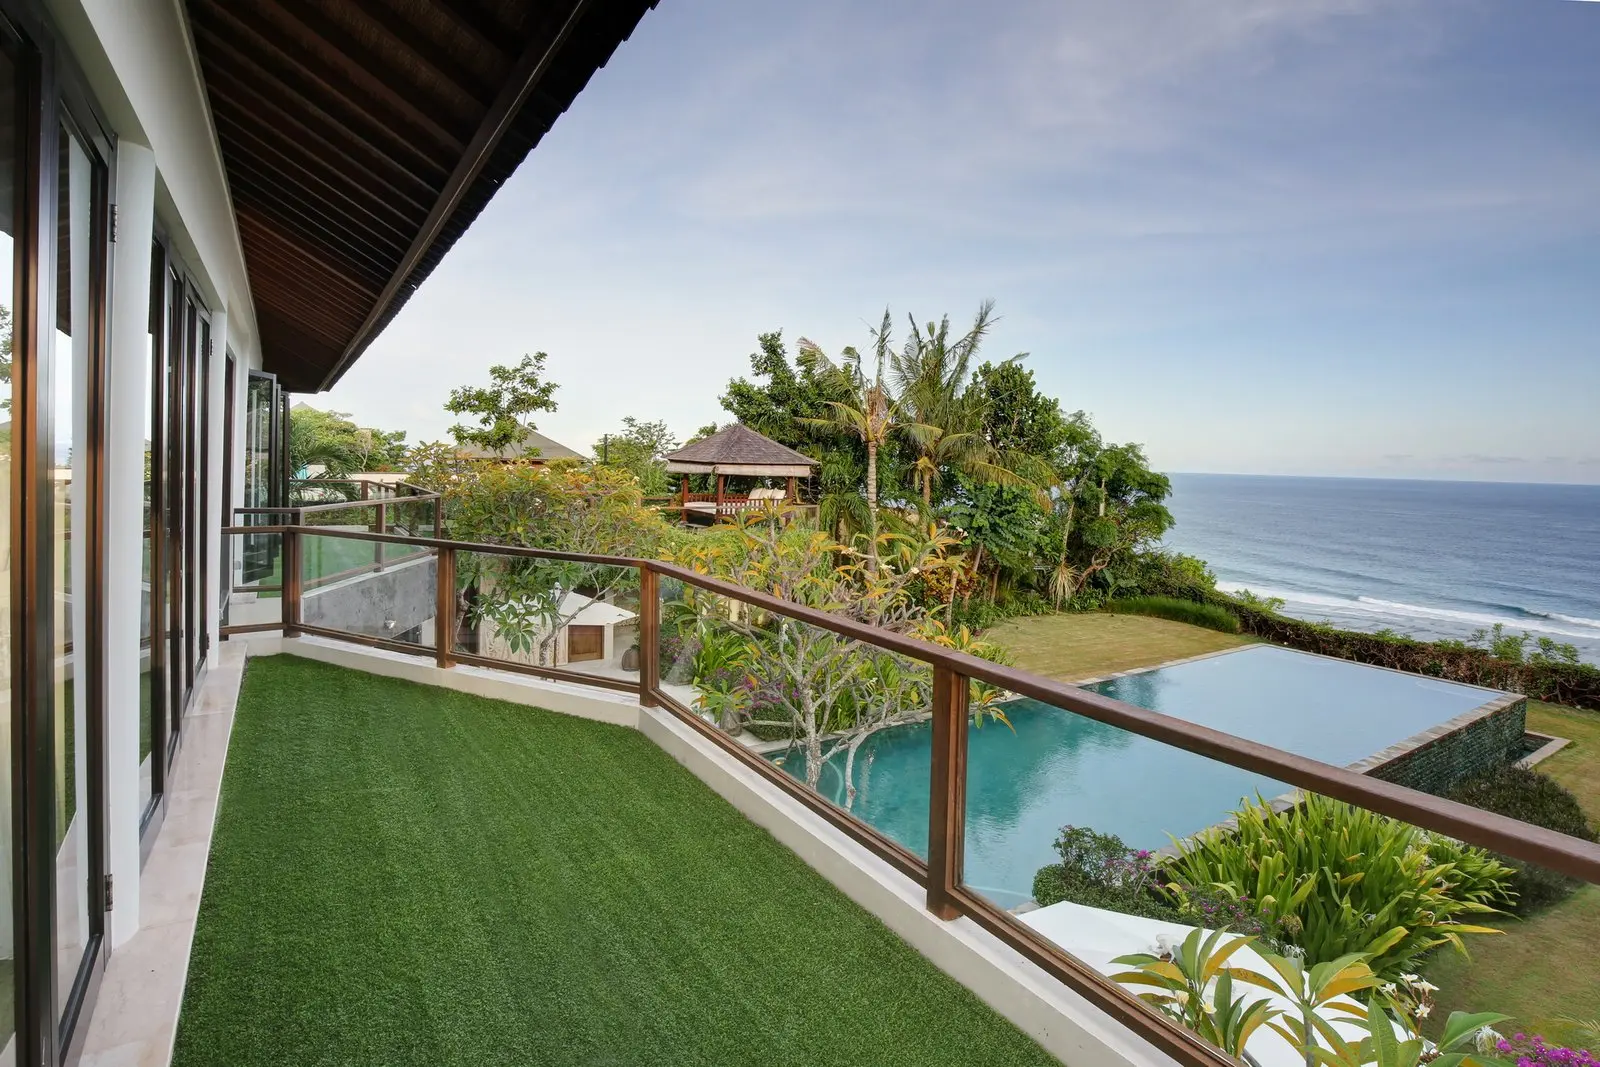 Embrace Opulence: Exquisite 6-Bedroom Villas with Private Pools in Bali